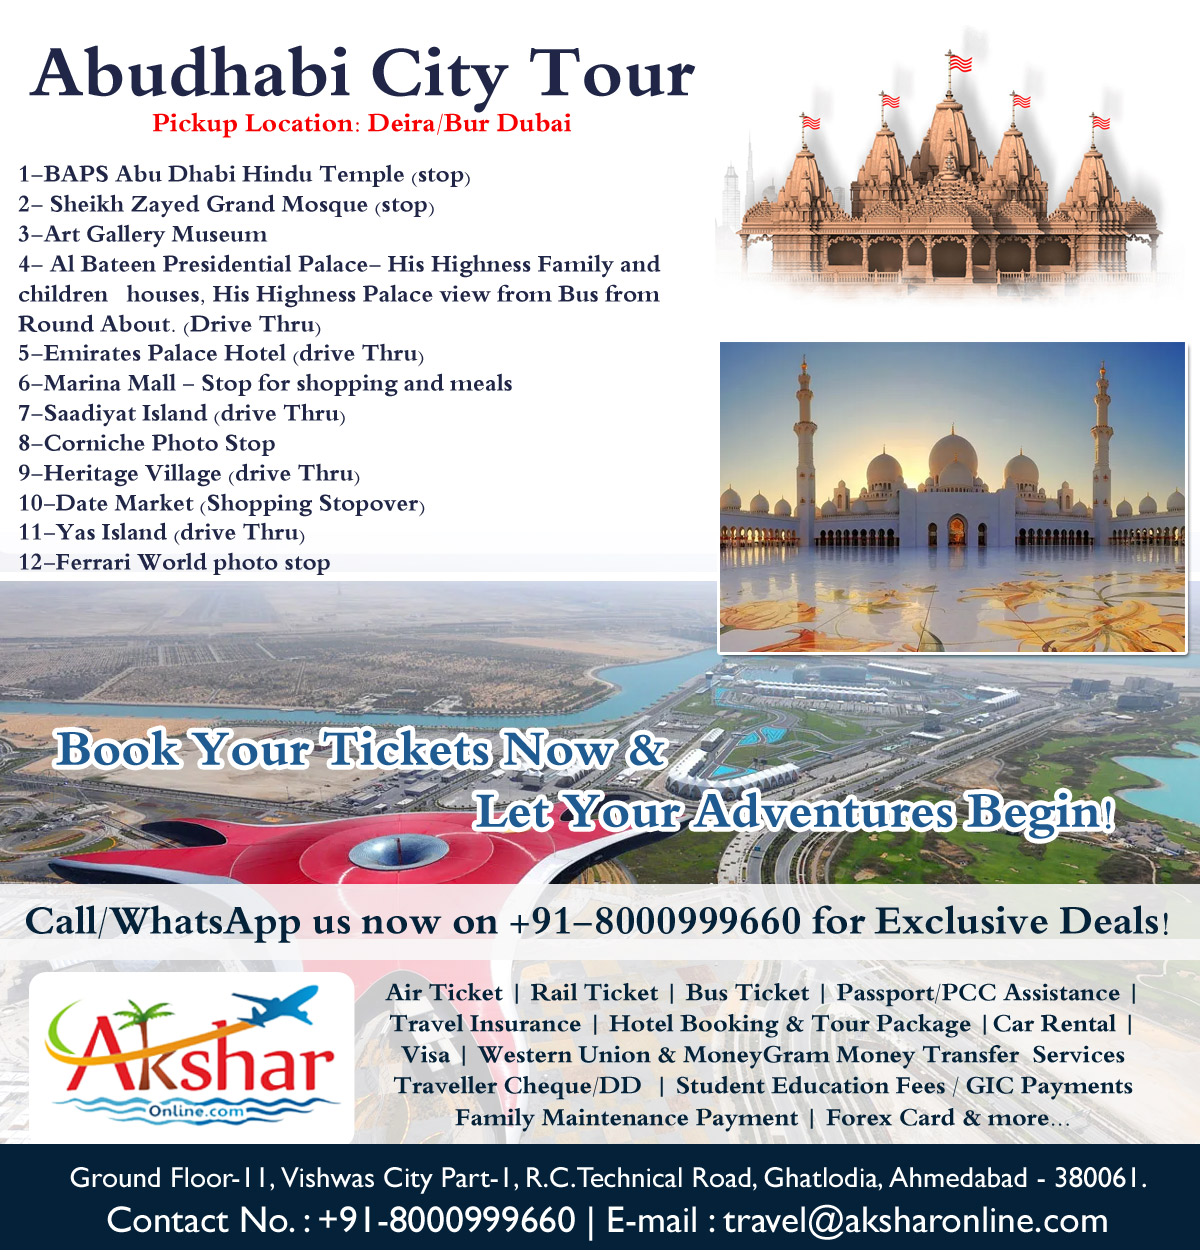 🌟 Experience the Magic of Abu Dhabi with Our Exclusive City Tour! 🌟  Discover the breathtaking beauty and rich culture of Abu Dhabi with our unforgettable city tour! 🏙️ From iconic landmarks to hidden gems, we'll take you on a journey you'll never forget.  🕌 Highlights of our tour include:  BAPS Abu Dhabi Hindu Temple Sheikh Zayed Grand Mosque Art Gallery Museum Al Bateen Presidential Palace Emirates Palace Hotel Marina Mall - Perfect for shopping and delicious meals! Saadiyat Island Corniche Photo Stop Heritage Village Date Market - Ideal for souvenir shopping! Yas Island Ferrari World - Capture stunning photos! 🚌 Our tour offers convenient pickup and drop-off from Deira Hotel, Dubai.  📞 For bookings and inquiries, call us now at +91-8000999660.  Don't miss out on this incredible adventure! Book your spot today and create memories that will last a lifetime. See you in Abu Dhabi! 🌟